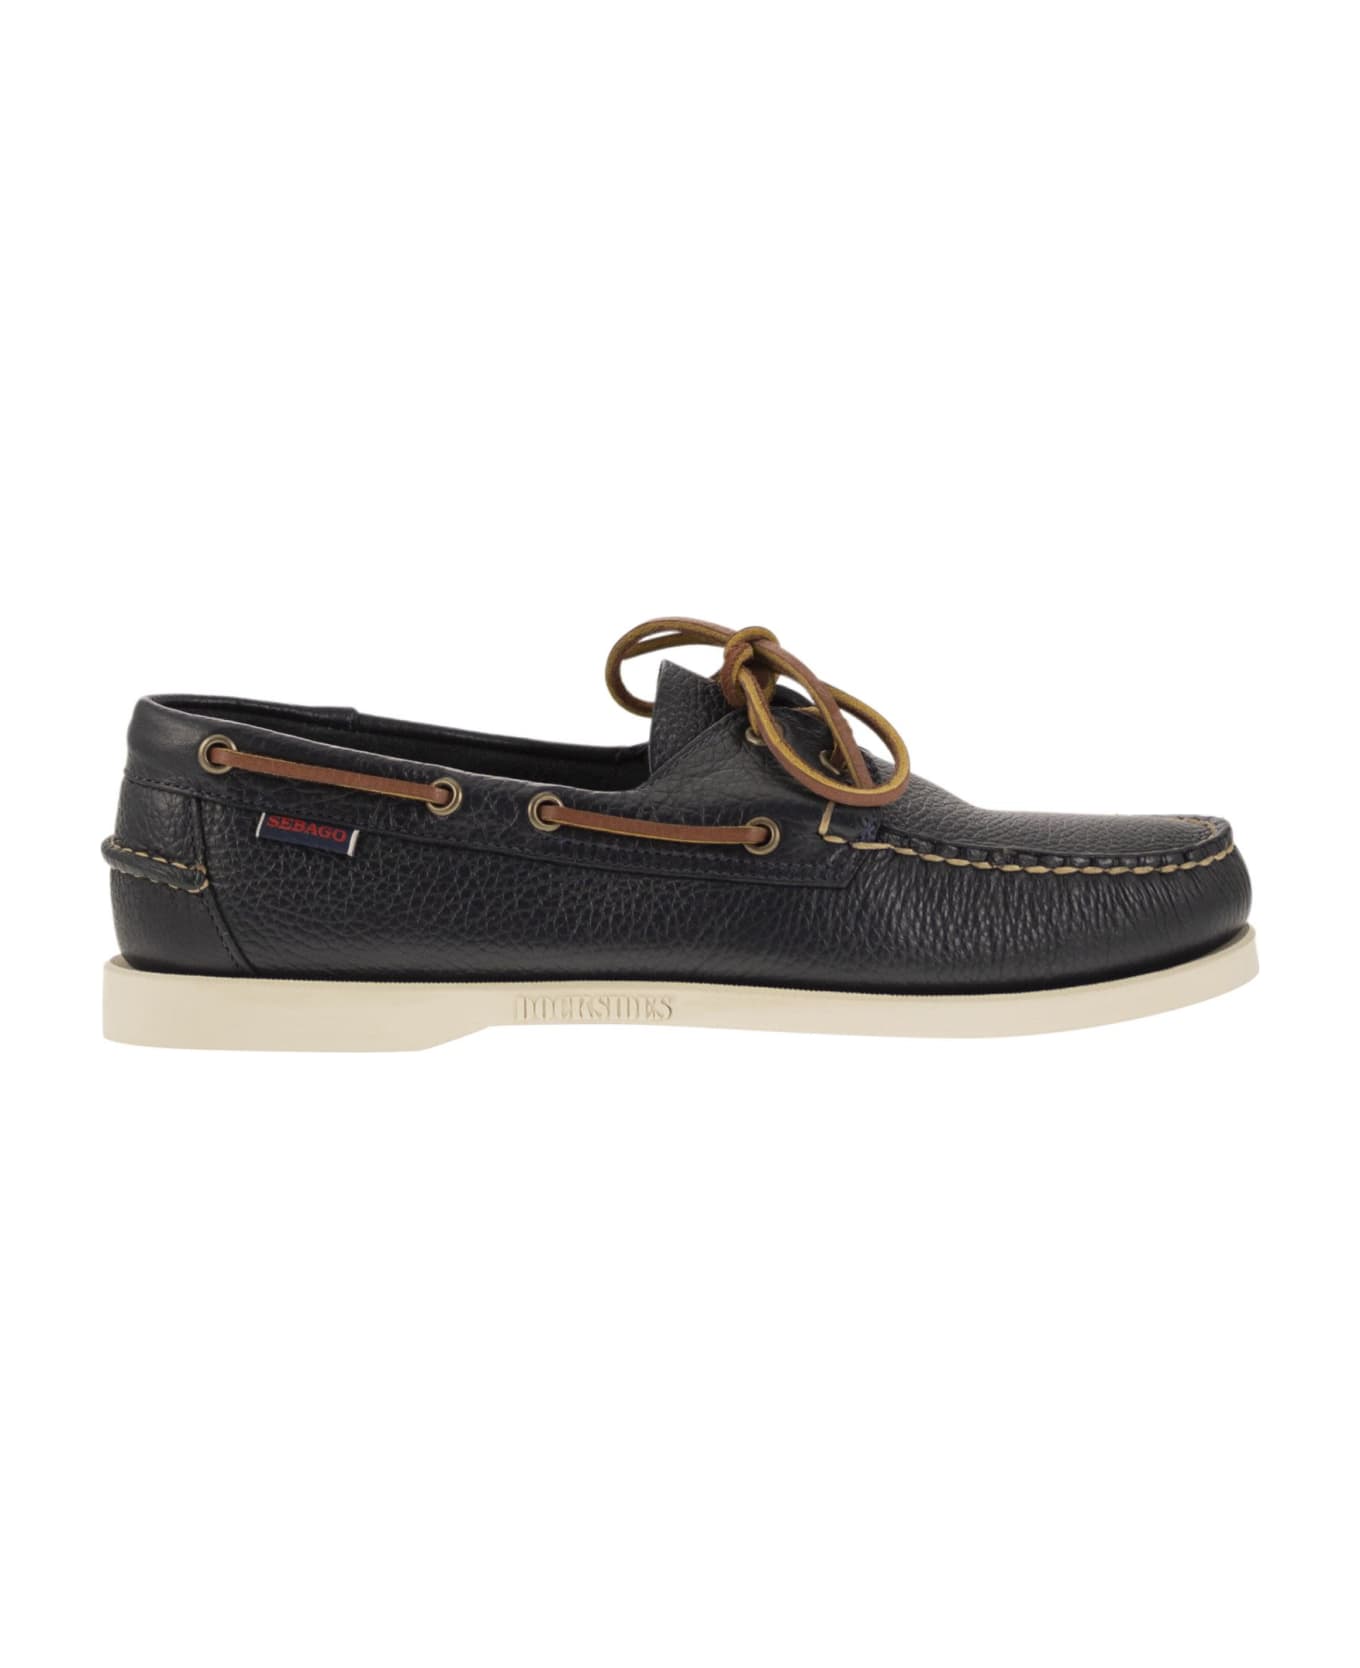 Sebago Portland - Moccasin With Grained Leather - Navy Blue